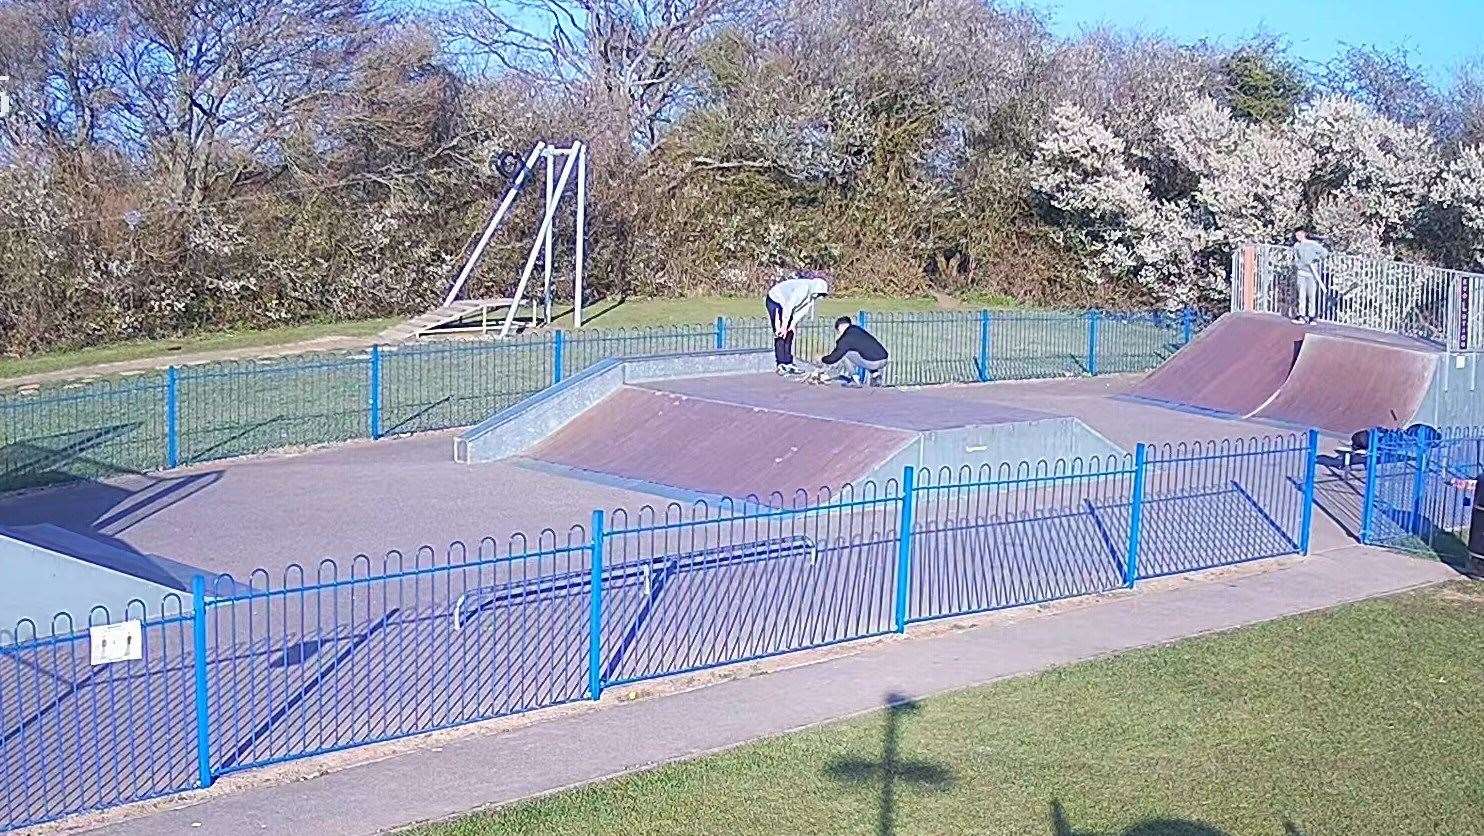 The skate park has been marked out of bounds because of the damage. Photo: Capel Le Ferne Parish Council